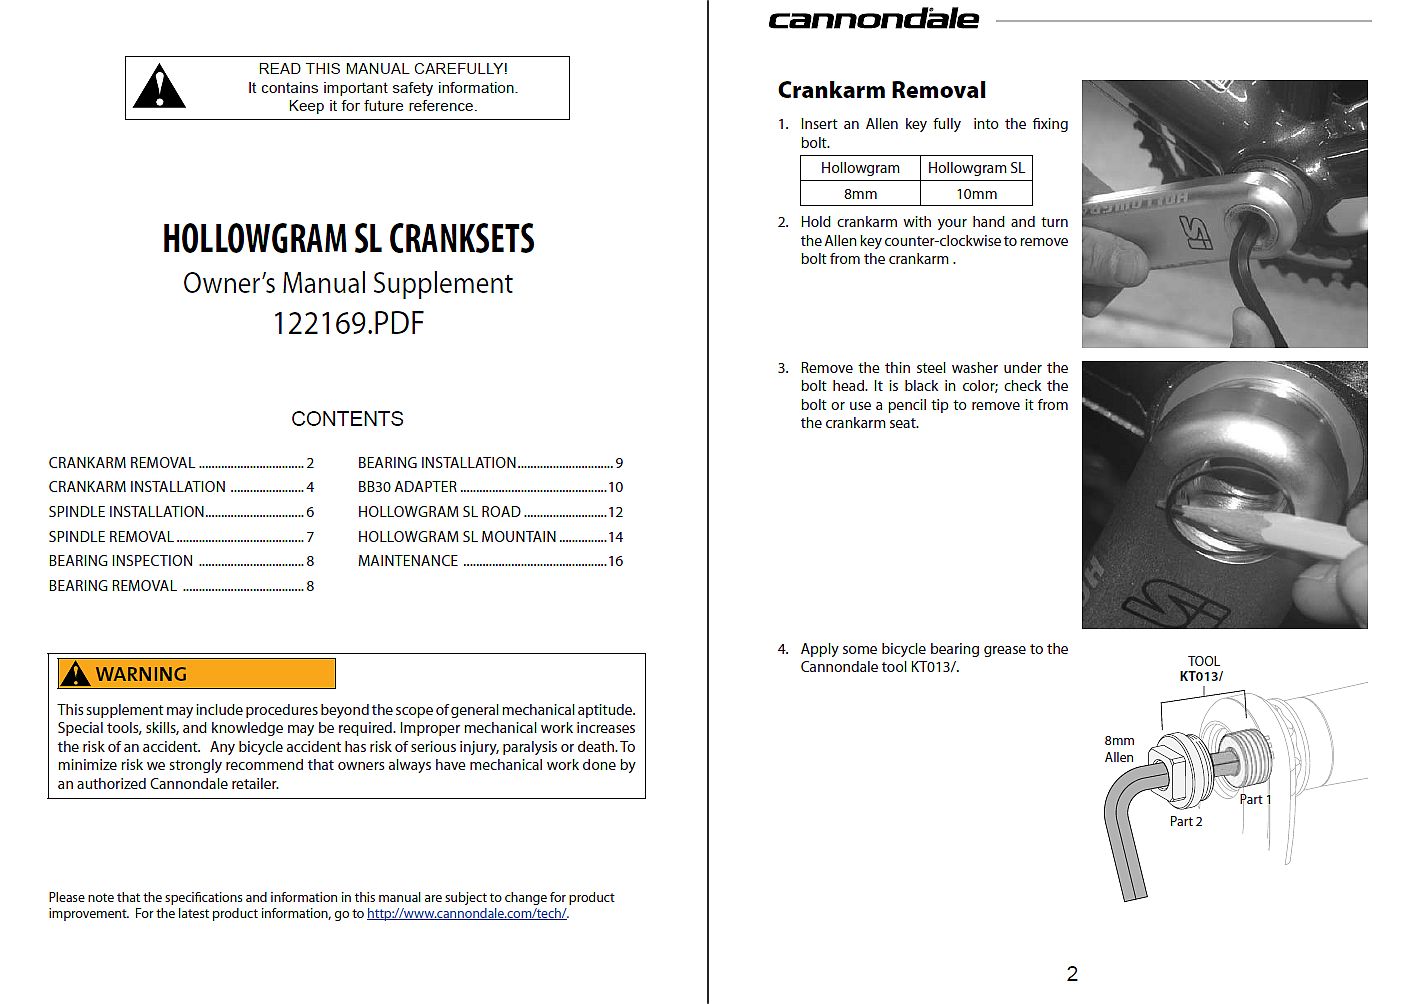 Cannondale Hollowgram SL Crankset Owner's Manual Installation and Removal